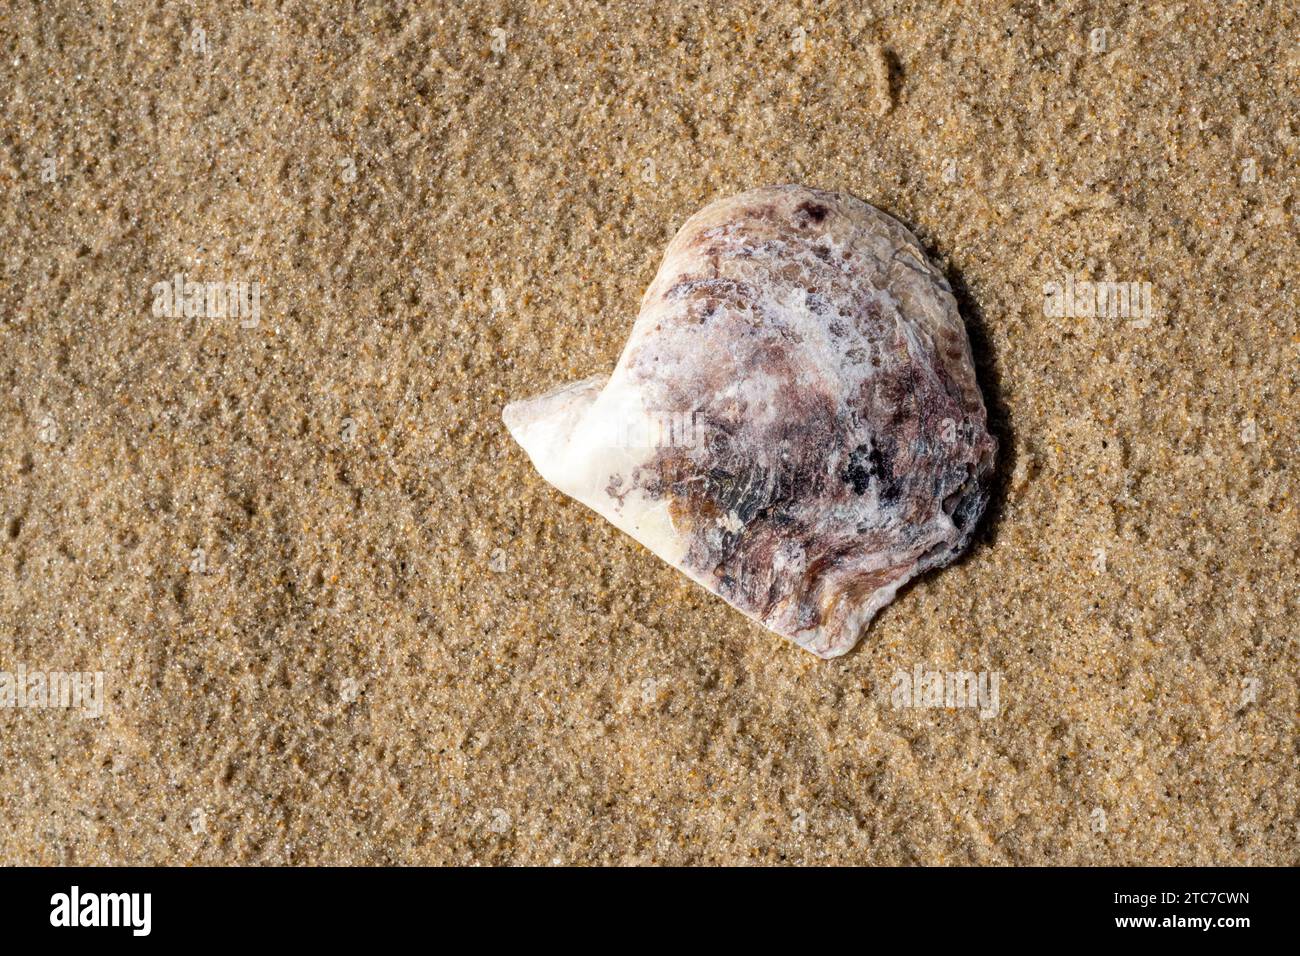 outer shell of a pearl oyster Pinctada is a genus of saltwater oysters, marine bivalve mollusks in the family Pteriidae. These pearl oysters have a st Stock Photo